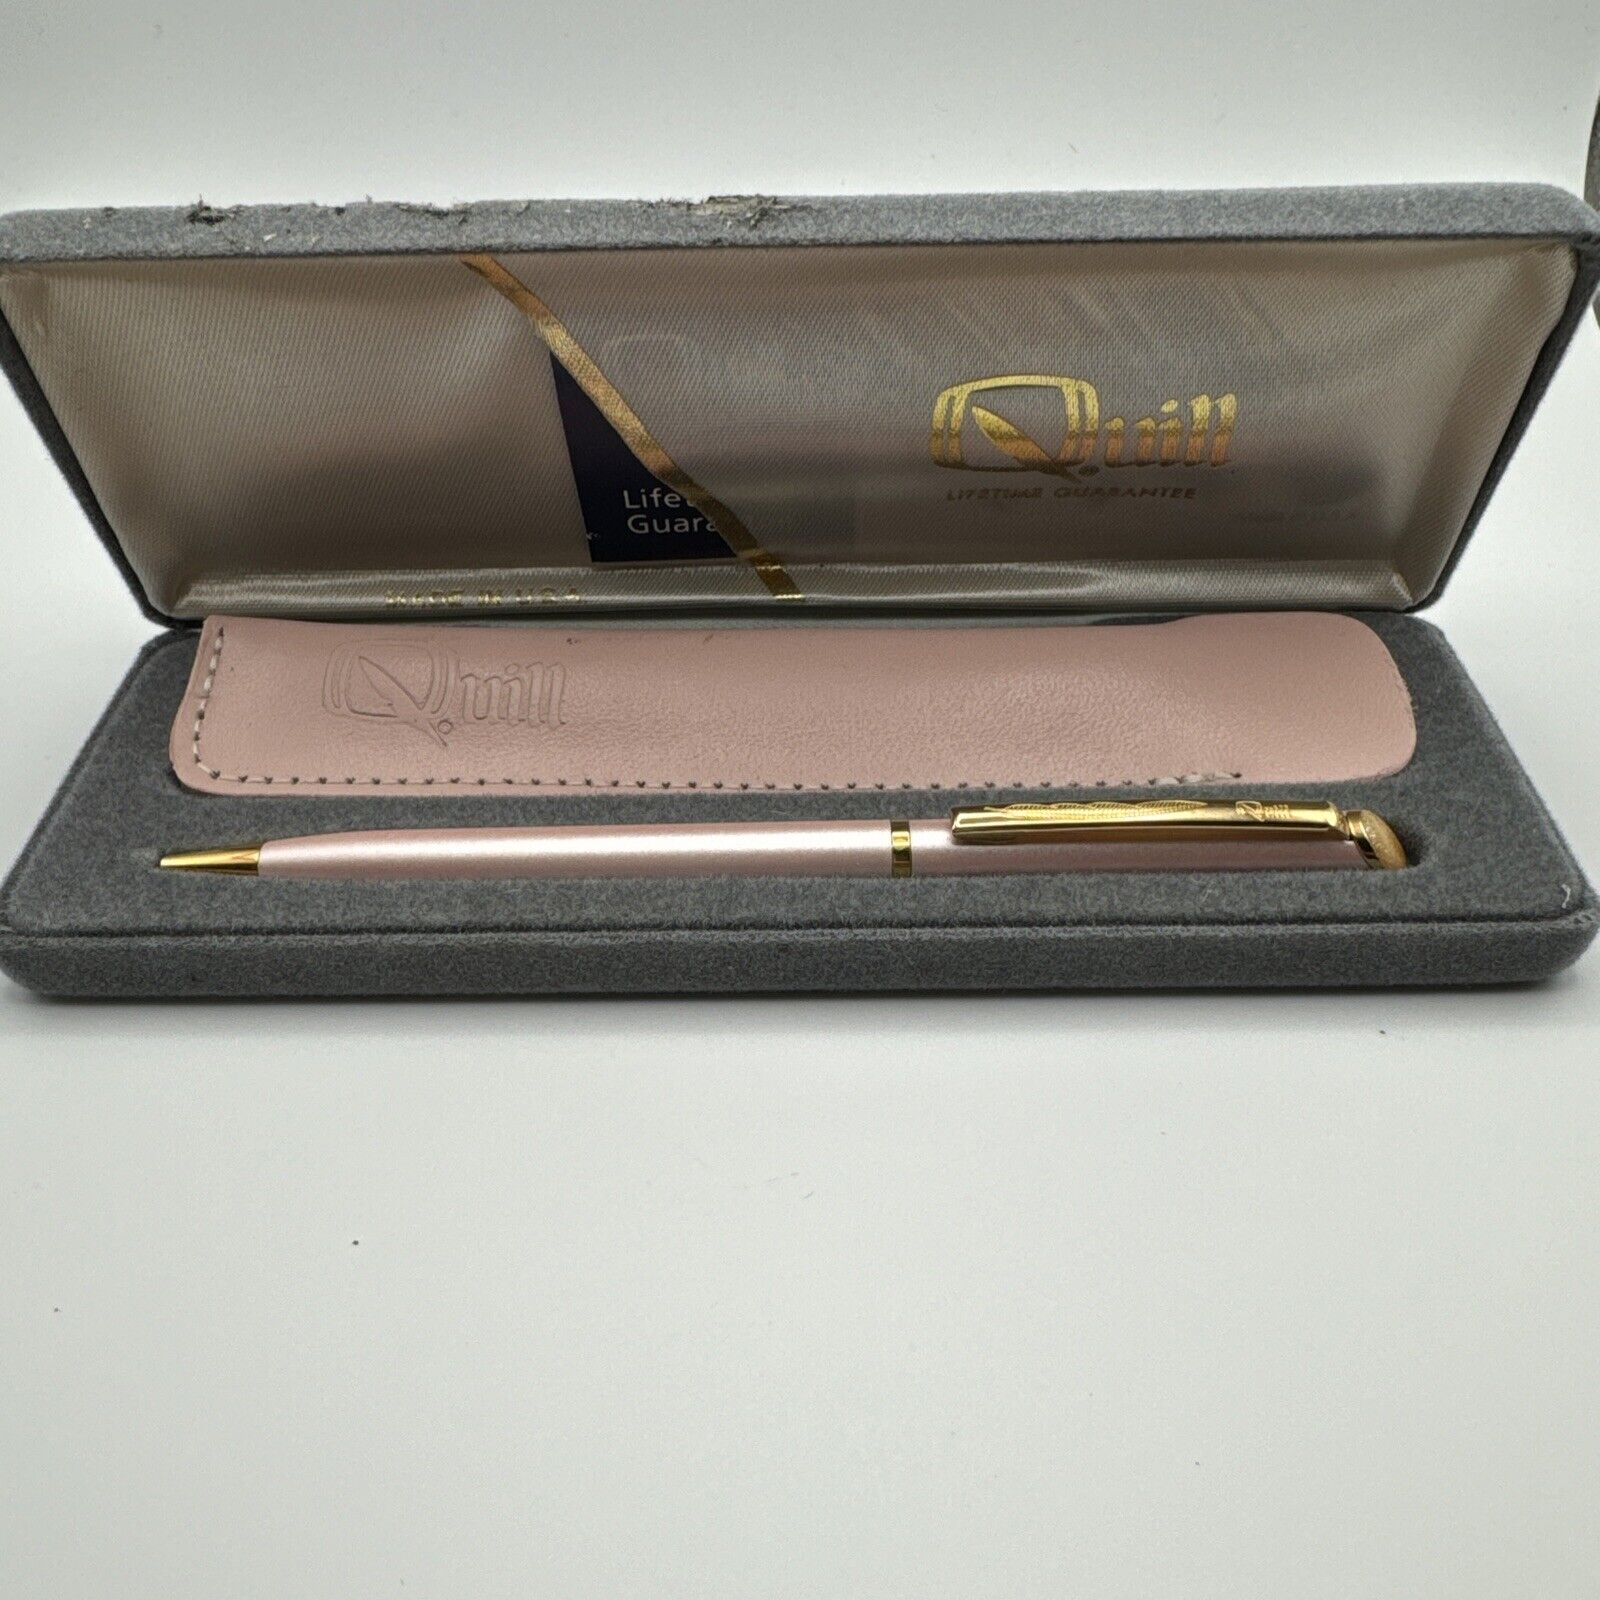 Vintage Quill Ballpoint Pen with Sleeve And Box - Pink And Gold